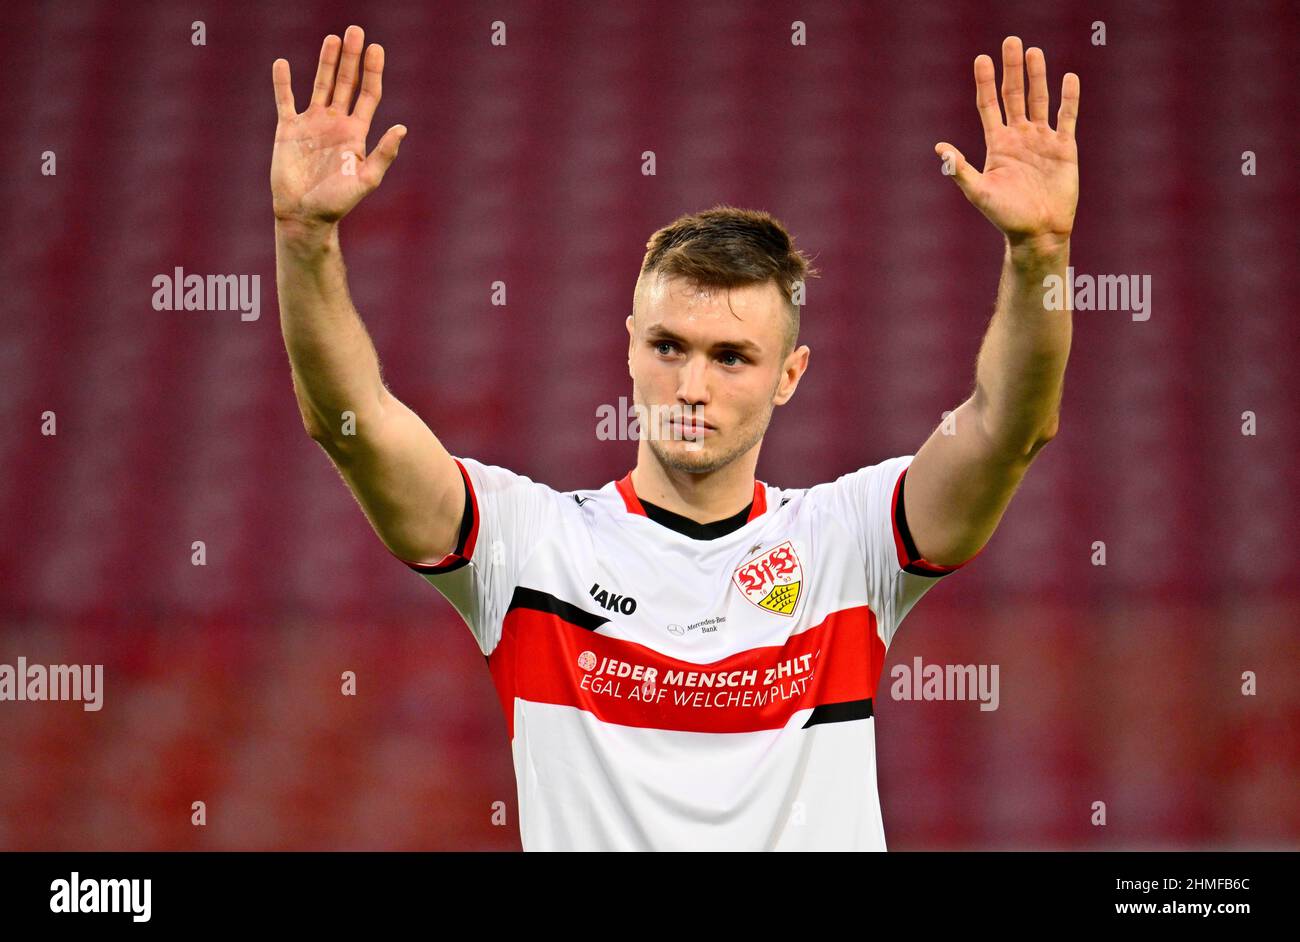 Sasa Kalajdzic, VfB Stuttgart, with special jersey EVERYONE COUNTS, REGARDLESS OF THE PLACE, against exclusion, Mercedes-Benz Arena, Stuttgart Stock Photo